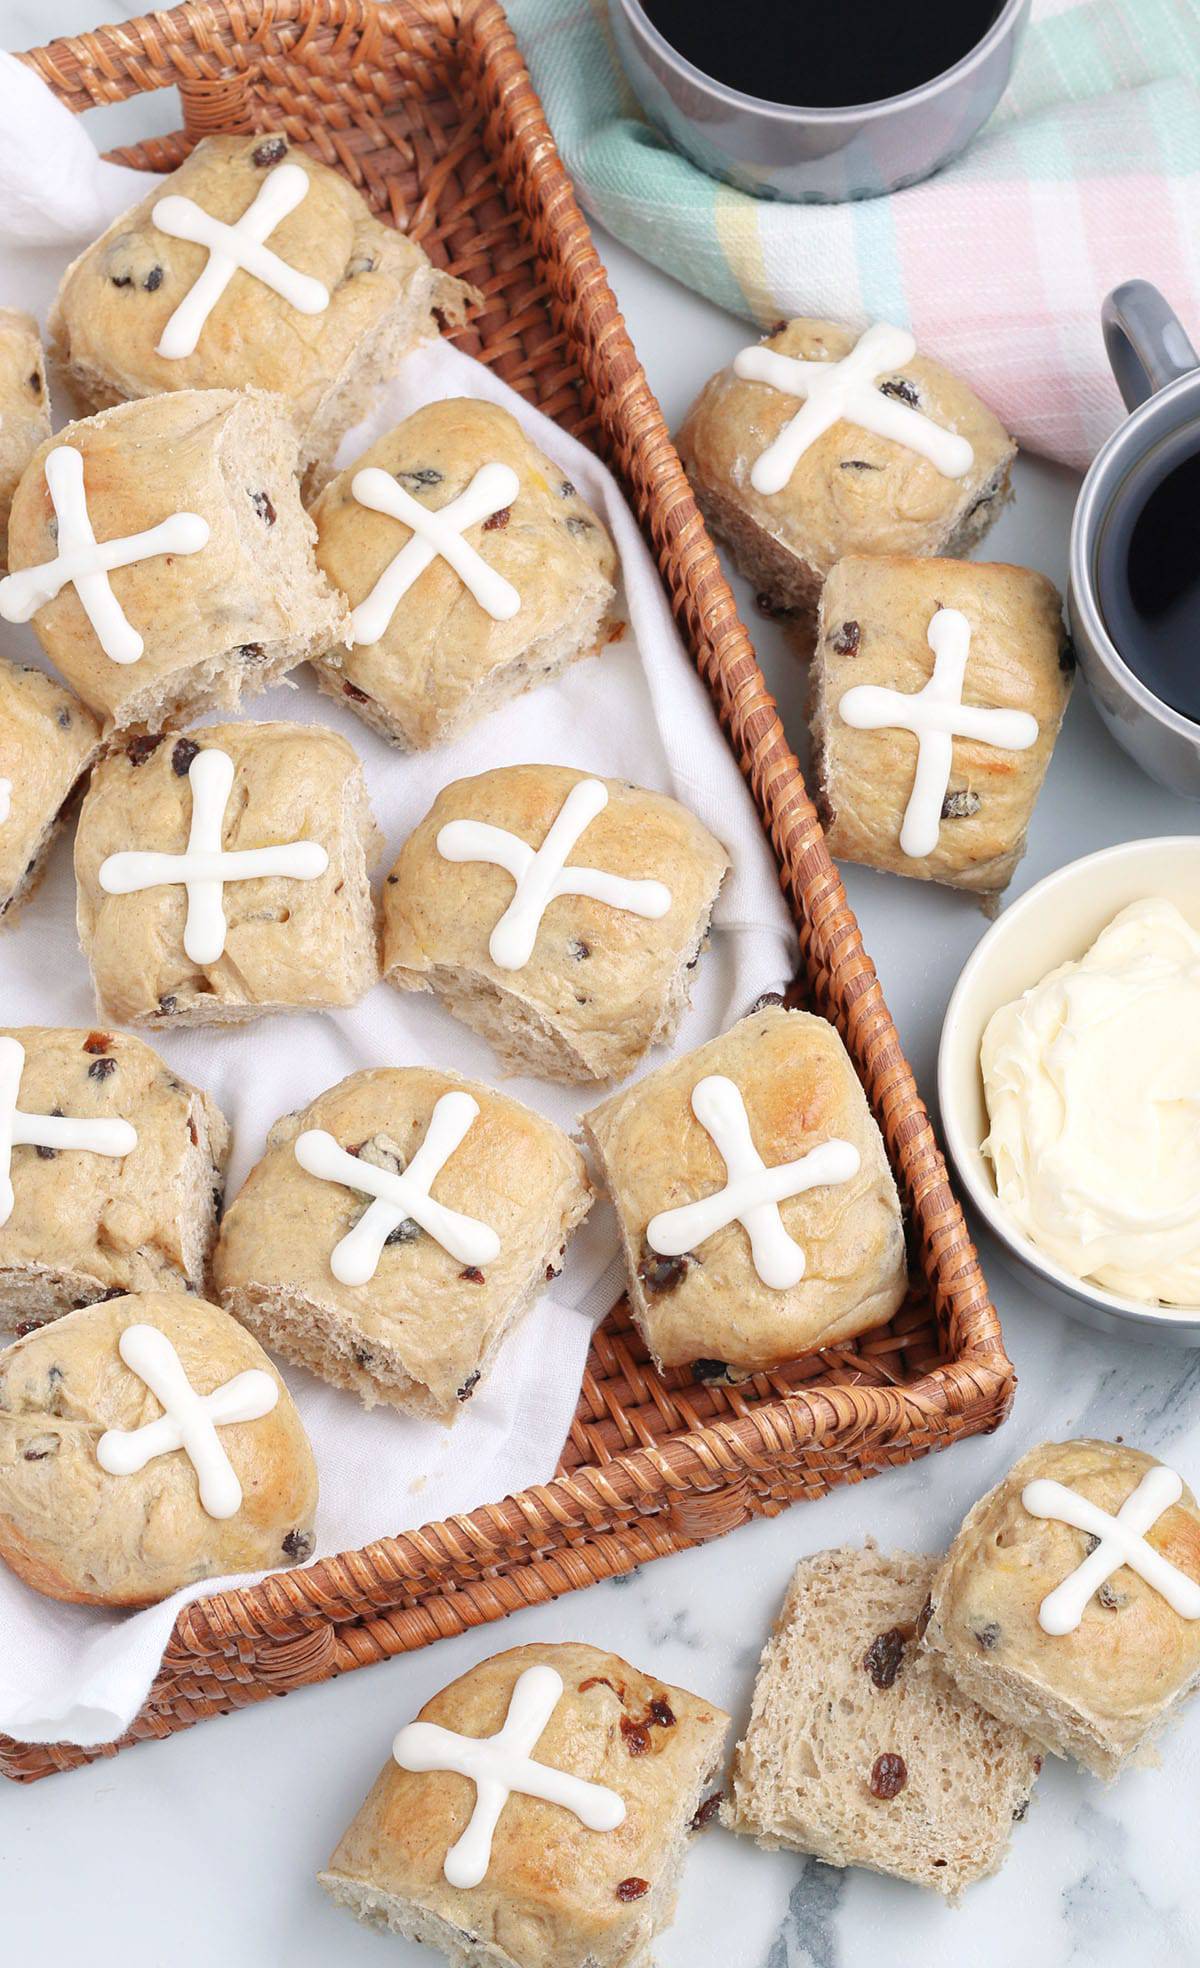 Hot Cross buns in a wicker tray with a bowl of frosting and two mugs of coffee.